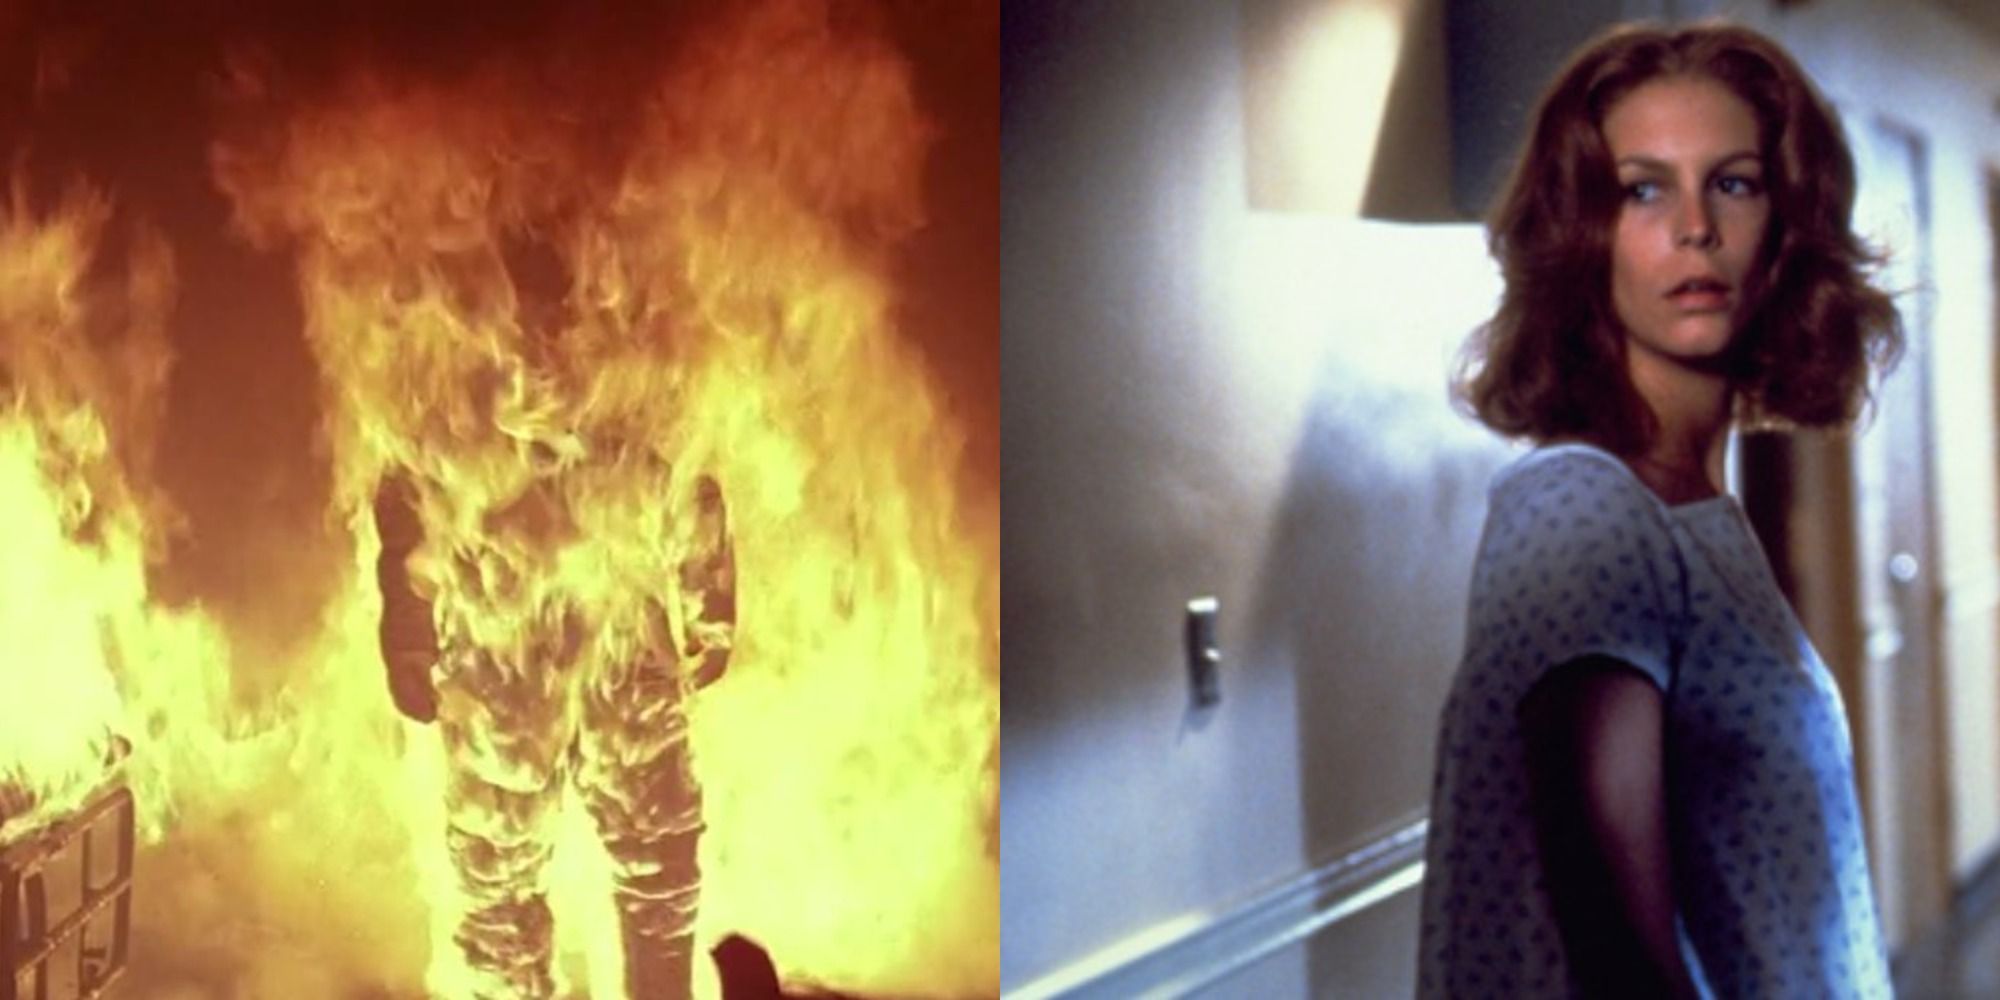 Split image of Michael Myers burning and Laurie Strode afraid